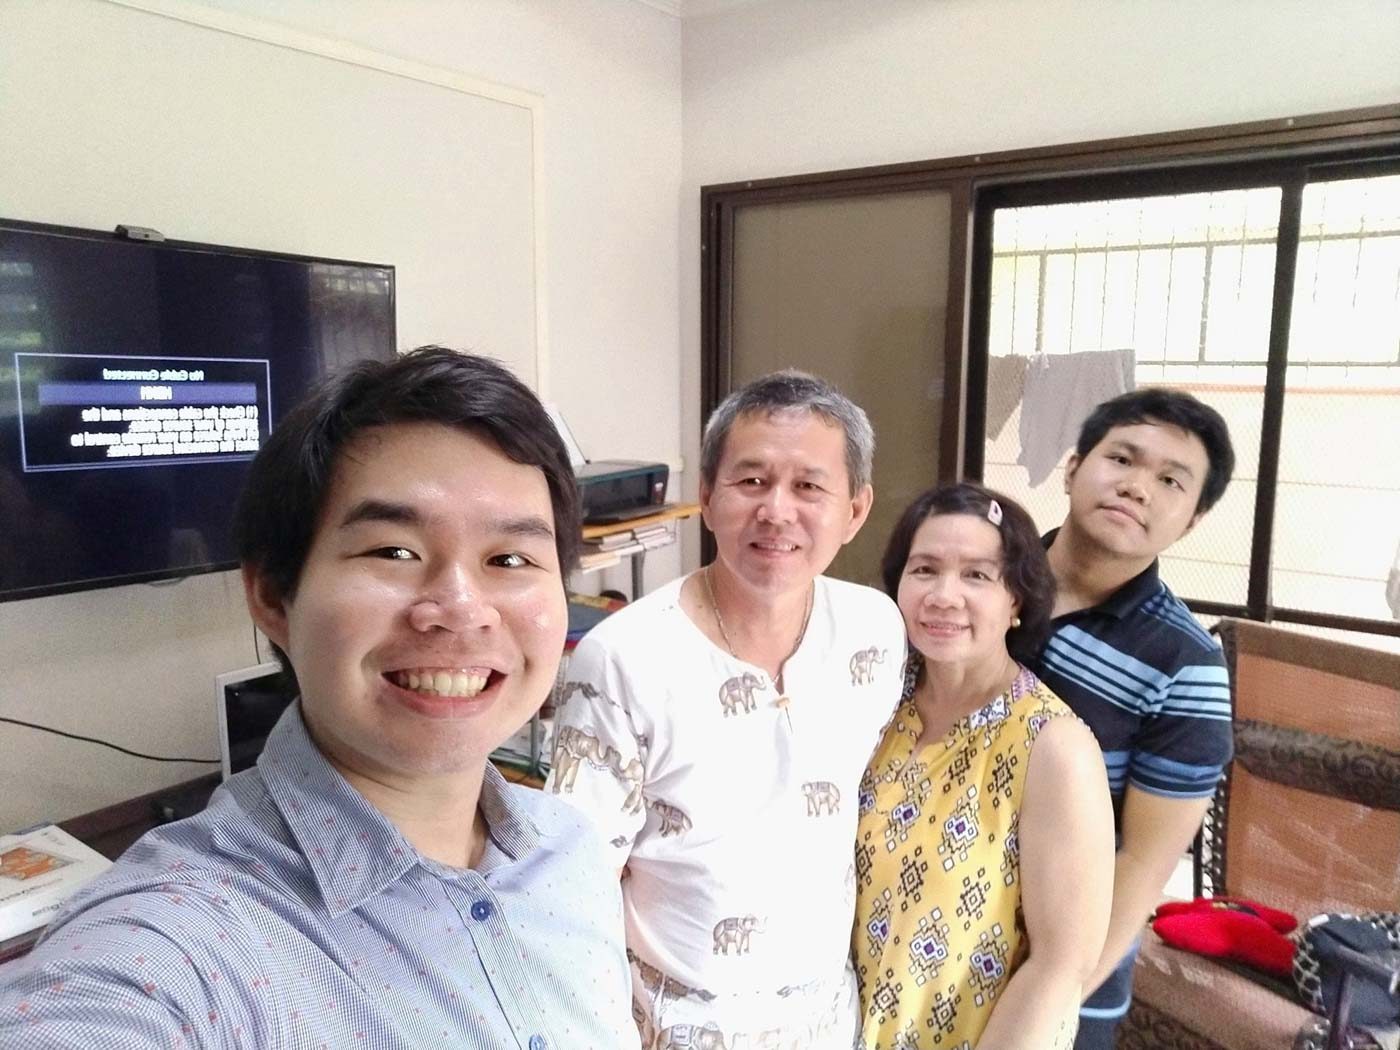 FAMILY. Jimeno poses for a photo together with her husband and two sons, both of whom are aspiring doctors. Photo courtesy of Jimeno